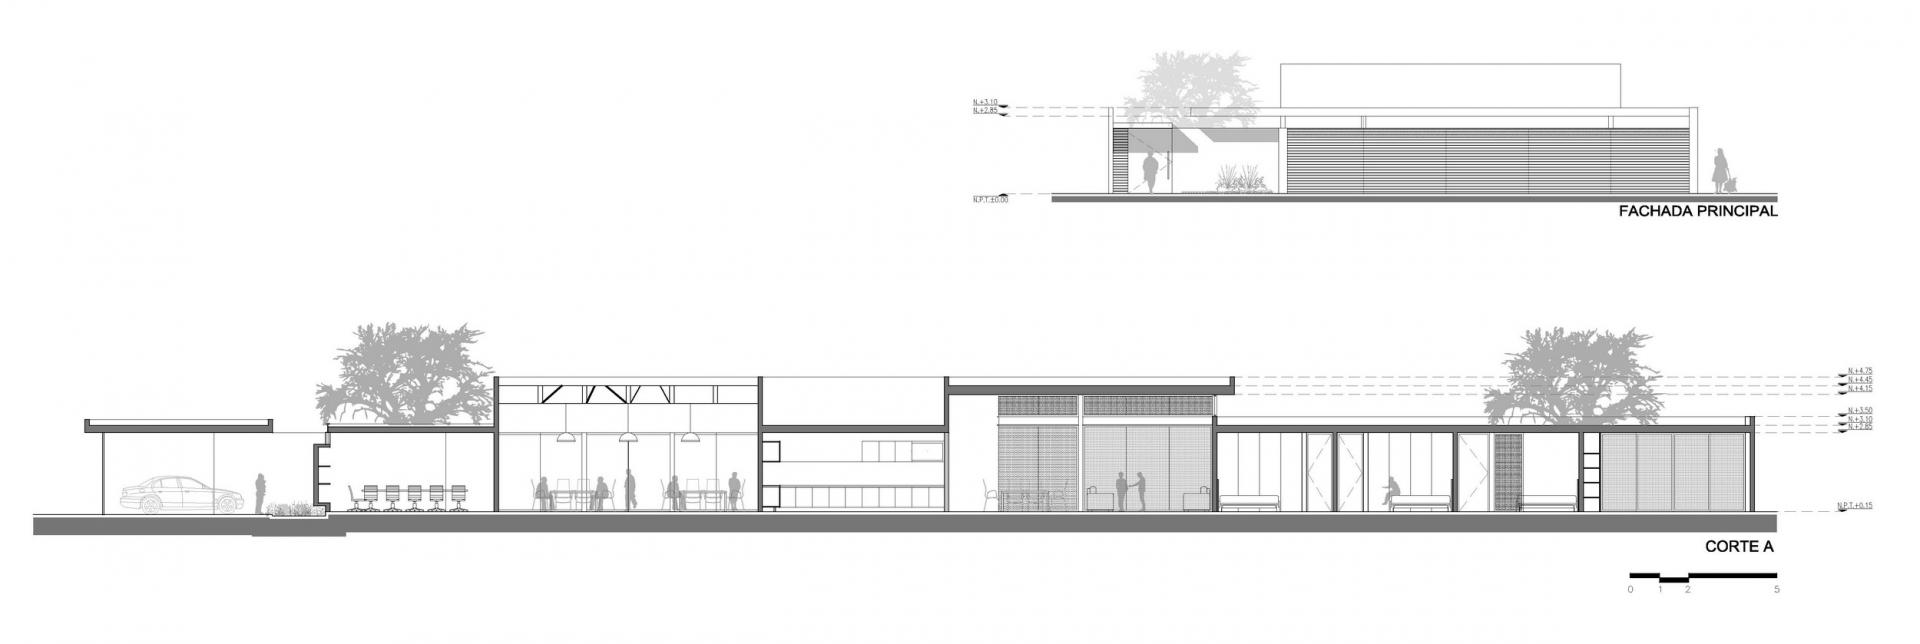 TCH HOUSE SECTION ELEVATION